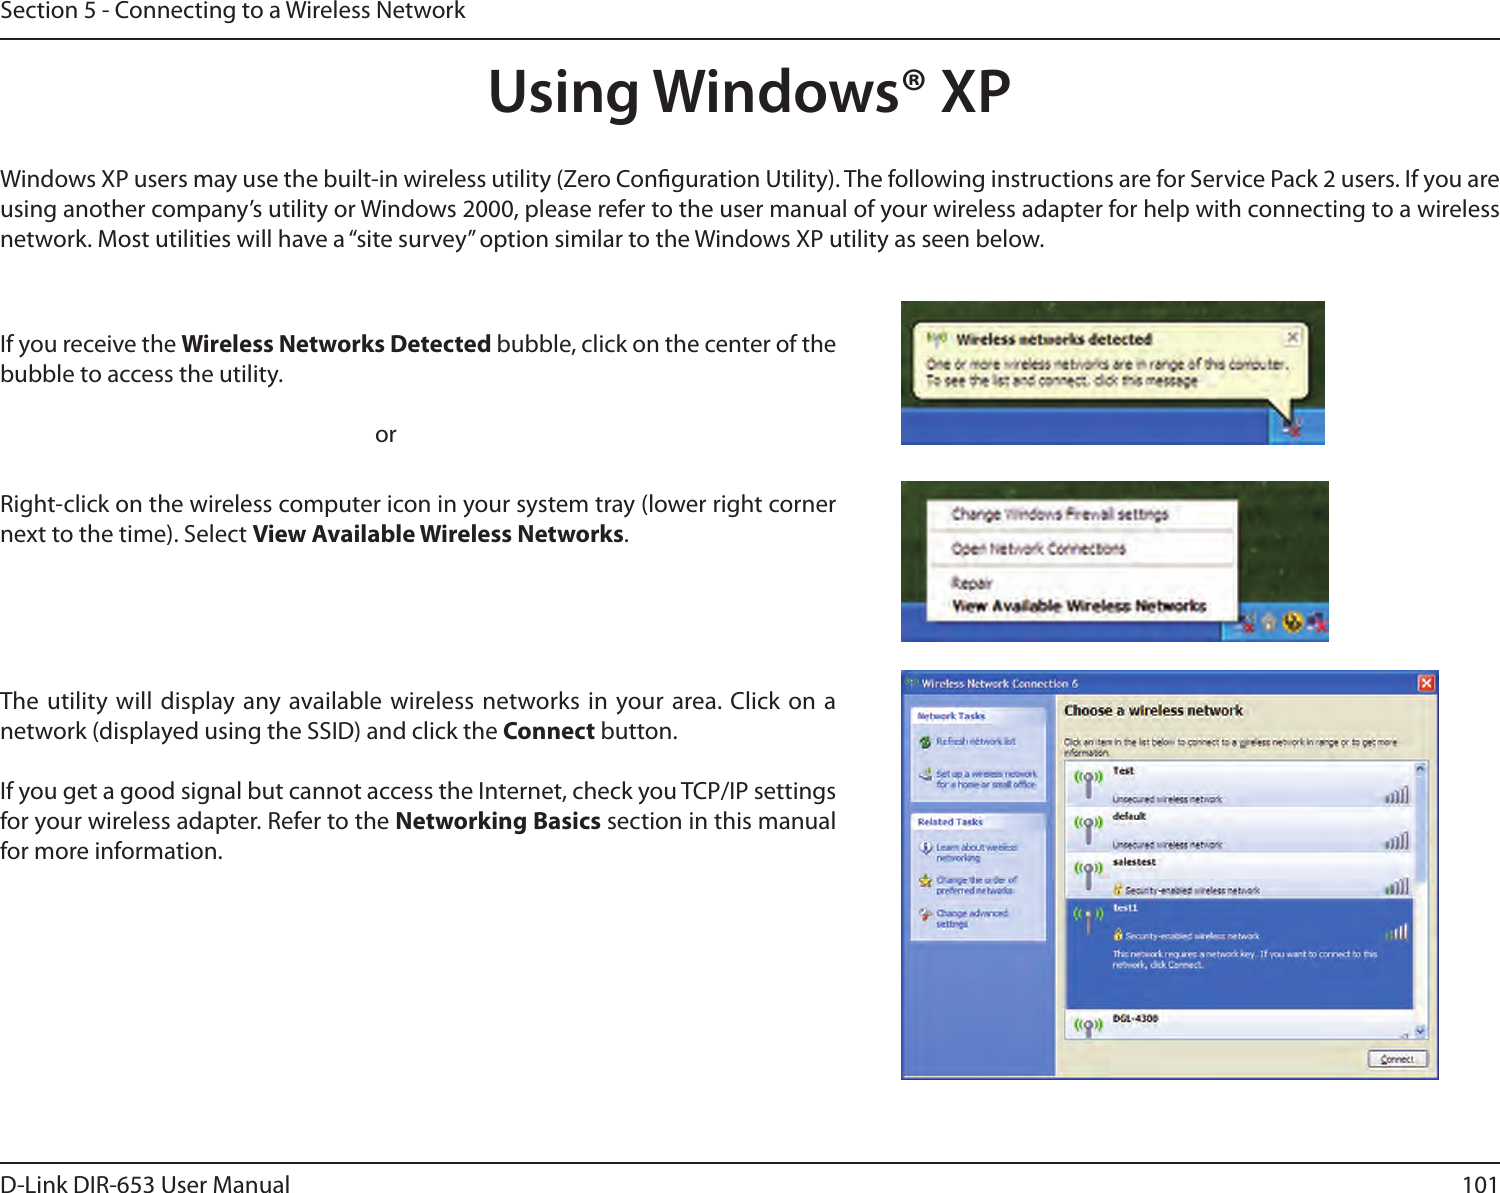 101D-Link DIR-653 User ManualSection 5 - Connecting to a Wireless NetworkUsing Windows® XPWindows XP users may use the built-in wireless utility (Zero Conguration Utility). The following instructions are for Service Pack 2 users. If you are using another company’s utility or Windows 2000, please refer to the user manual of your wireless adapter for help with connecting to a wireless network. Most utilities will have a “site survey” option similar to the Windows XP utility as seen below.Right-click on the wireless computer icon in your system tray (lower right corner next to the time). Select View Available Wireless Networks.If you receive the Wireless Networks Detected bubble, click on the center of the bubble to access the utility.     orThe utility will  display any available wireless networks in your area. Click  on a network (displayed using the SSID) and click the Connect button.If you get a good signal but cannot access the Internet, check you TCP/IP settings for your wireless adapter. Refer to the Networking Basics section in this manual for more information.